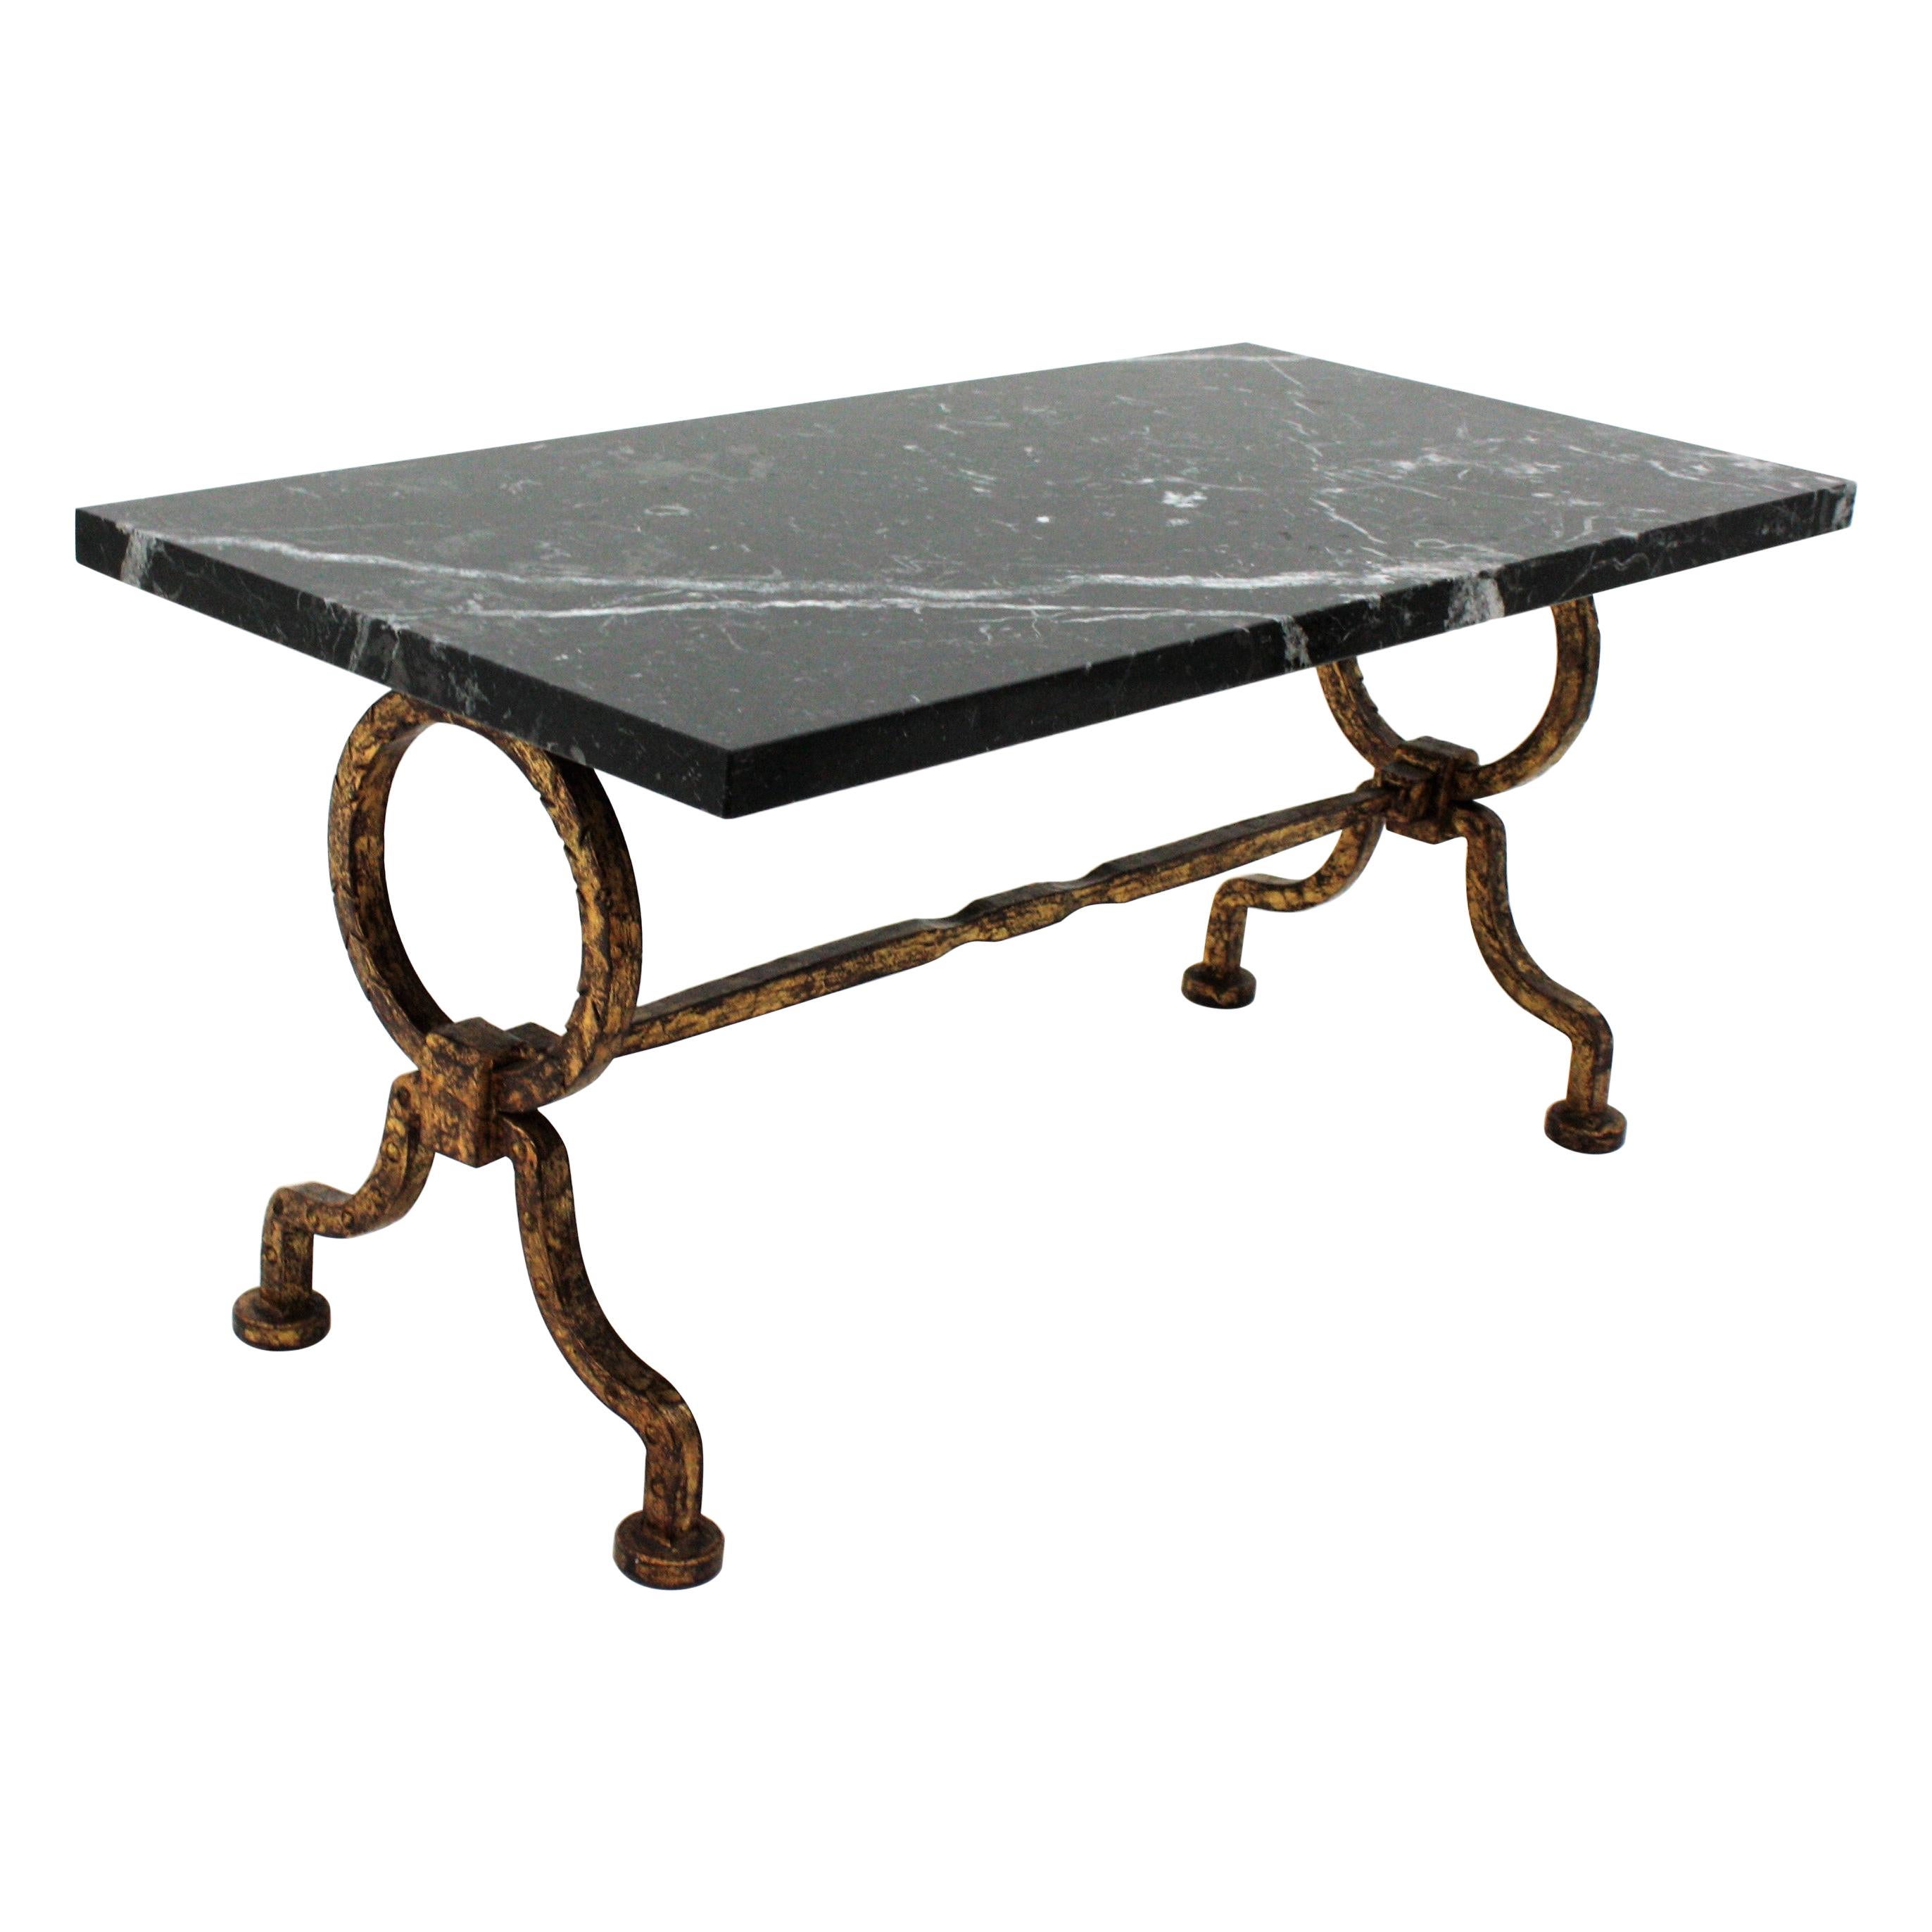 Beautiful Gilbert Poillerat wrought iron low table with black and white marble top. France, 1940s.
Stylish shapes and dramatic black marble top with white veins.
Very good condition.
Original gold leaf gilding and beautiful aged patina.
Use it